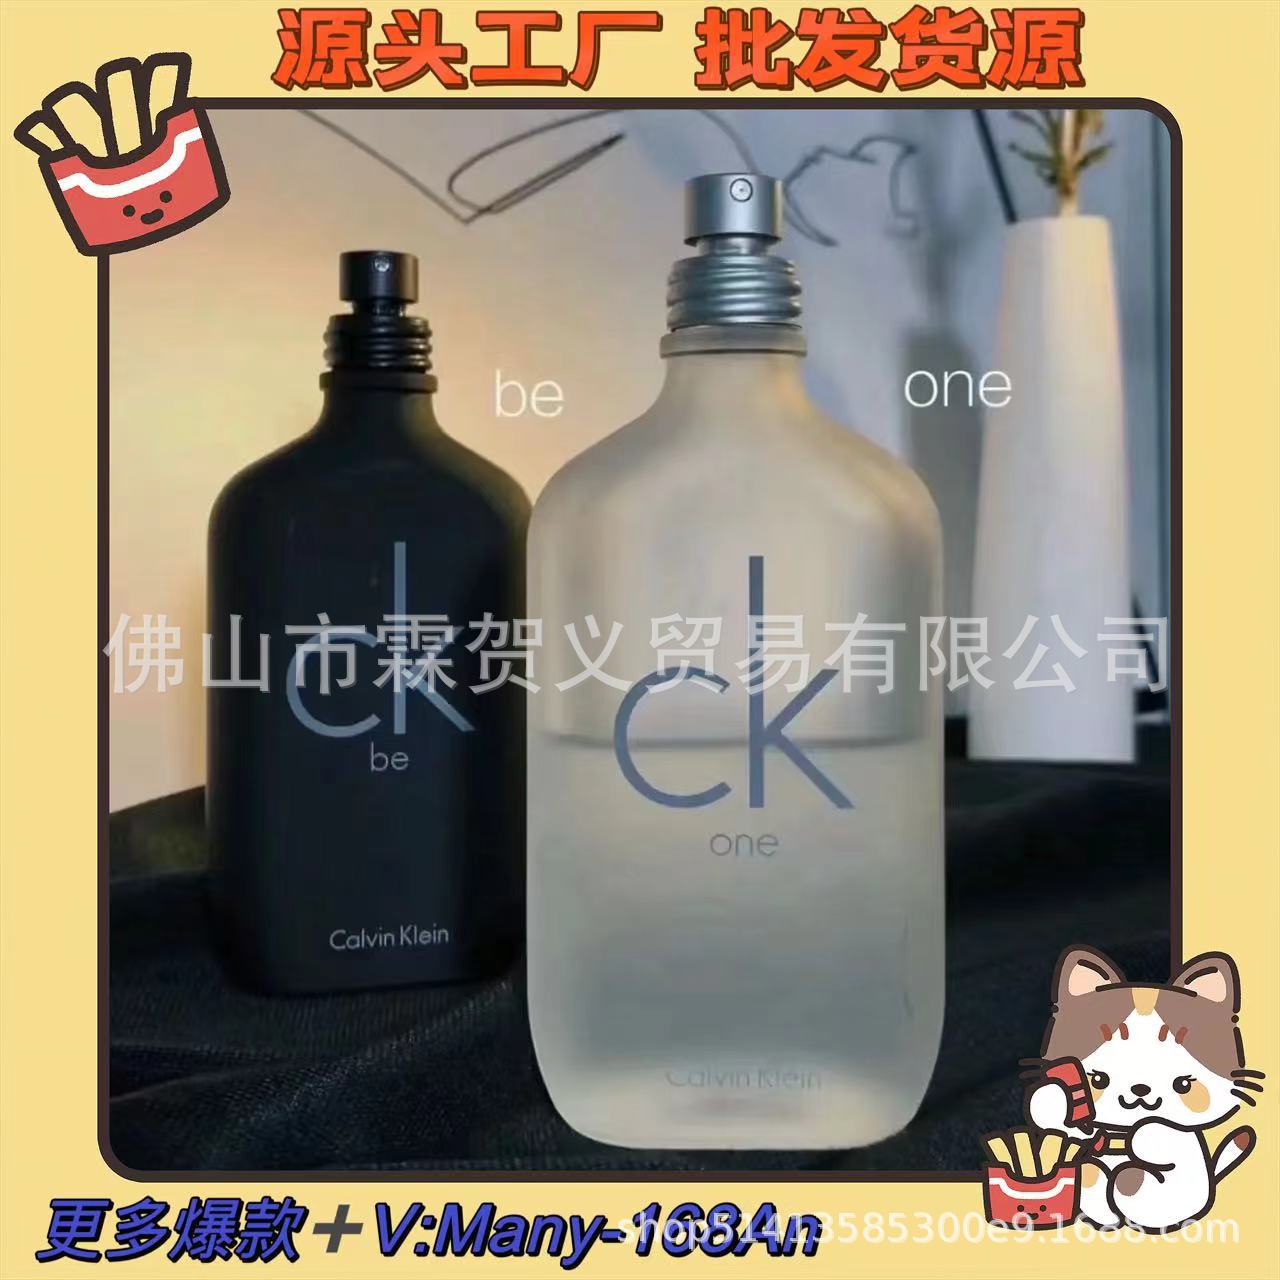 Ck one Unisex Men's and Women's Foreign Trade Gulong perfume 100ml Fragrance Fresh and durable hair wholesale